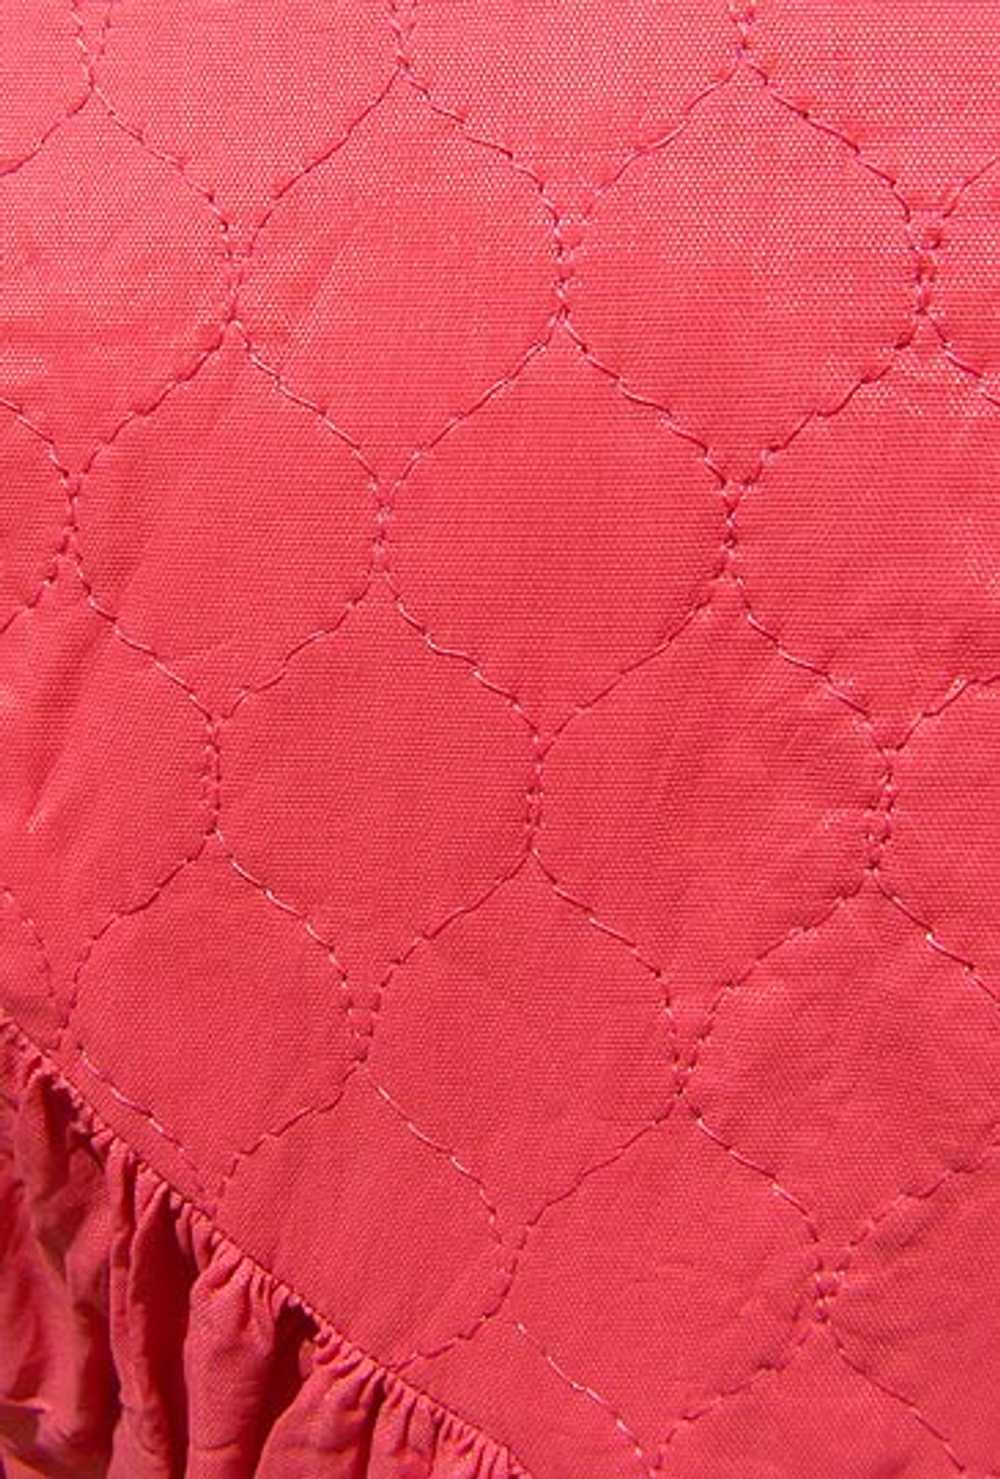 Romantic quilted housecoat - image 2